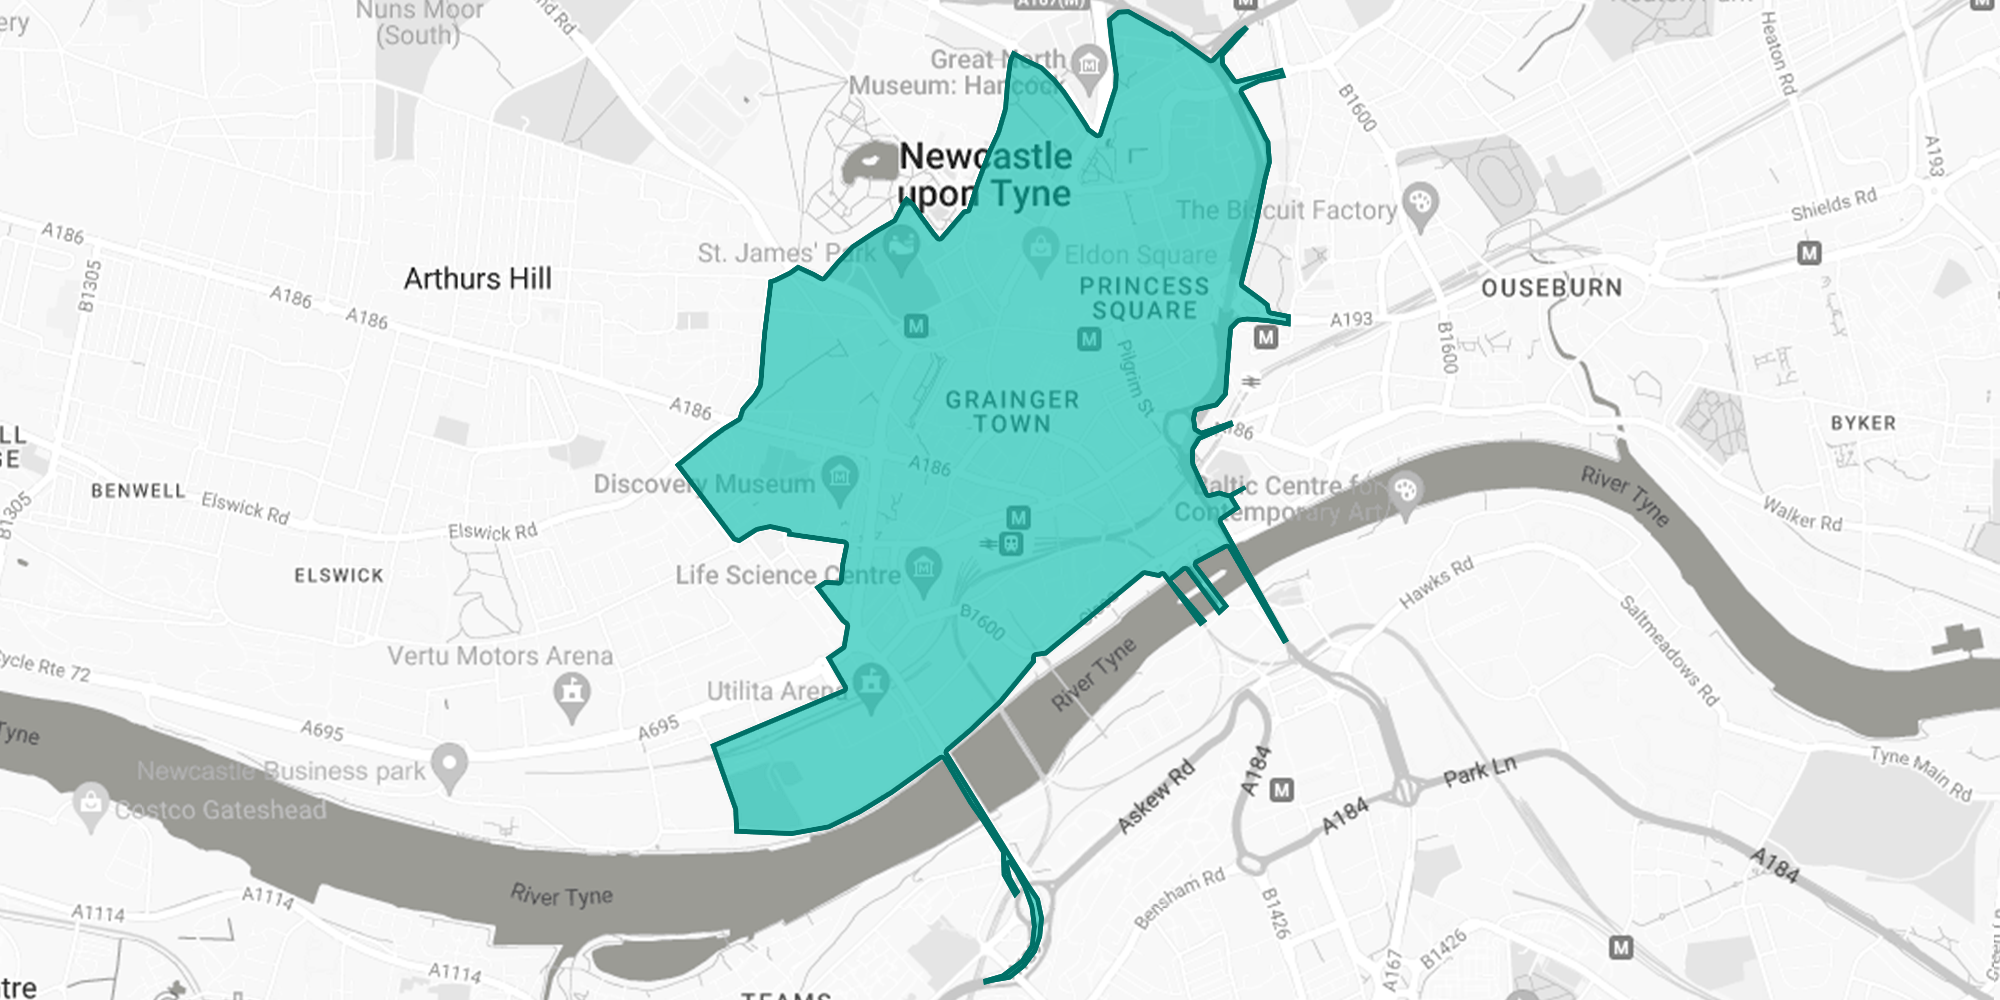 A map of the Newcastle Clean Air Zone, outlined in blue.